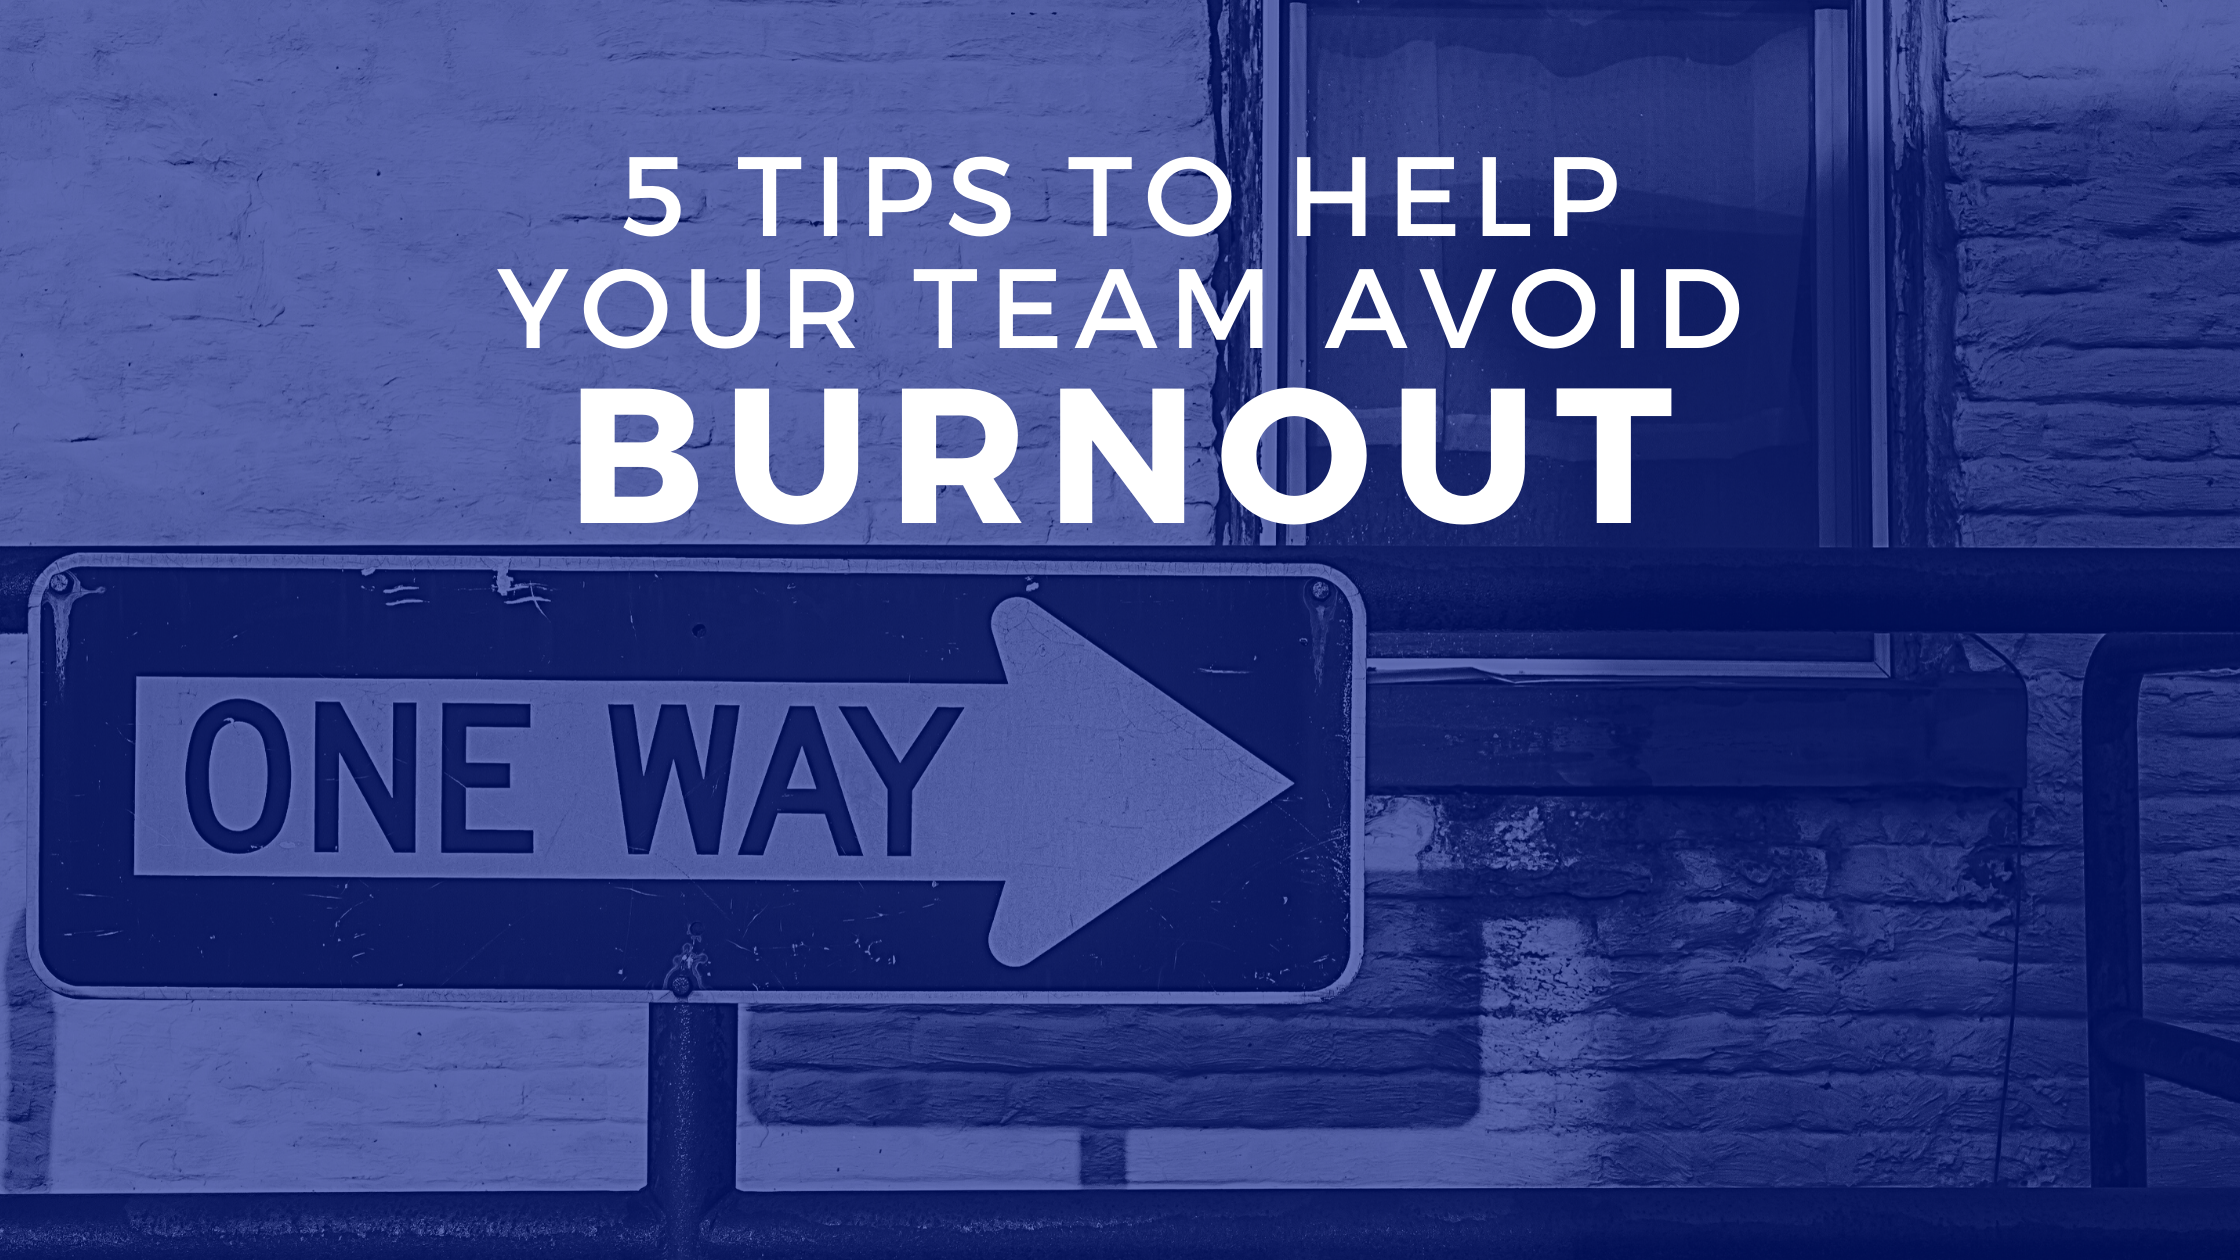 RDI Corporation - 5 Tips to Help Your Team Avoid Burnout